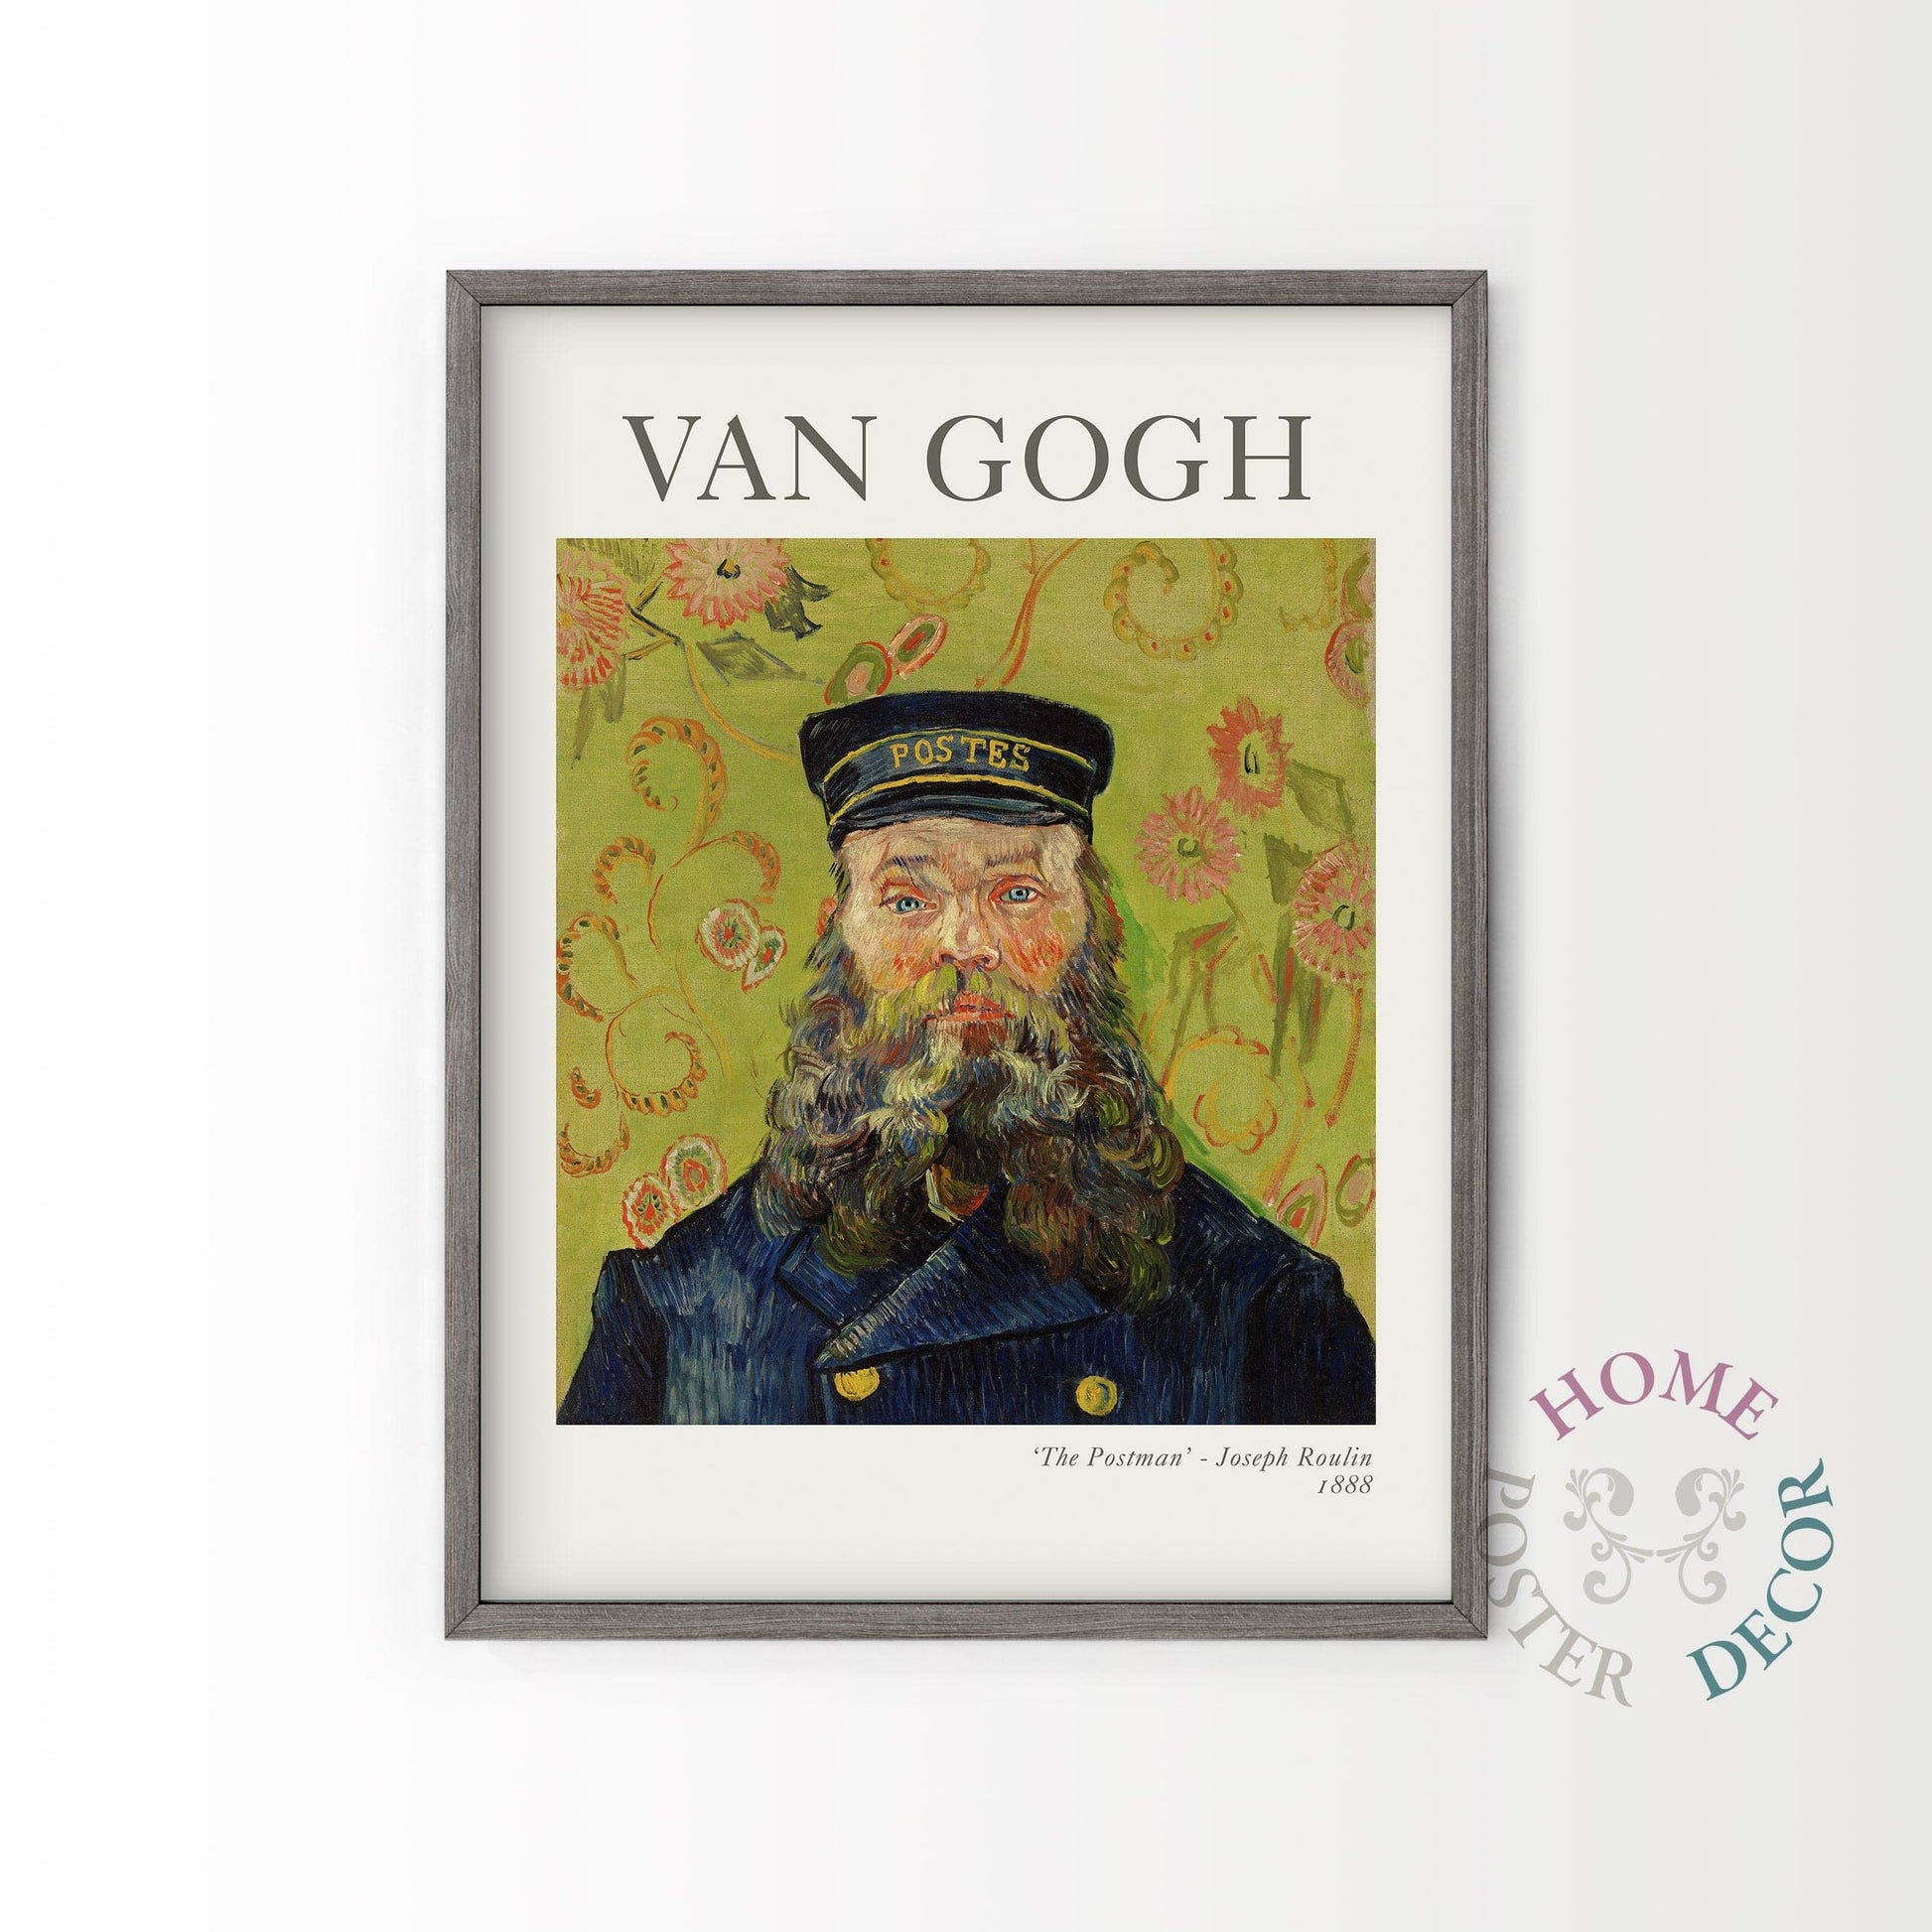 Home Poster Decor Van Gogh Poster, Van Gogh Painting, Reproduction Van Gogh, Classic Painting, Post-impressionist Painter, The Postman